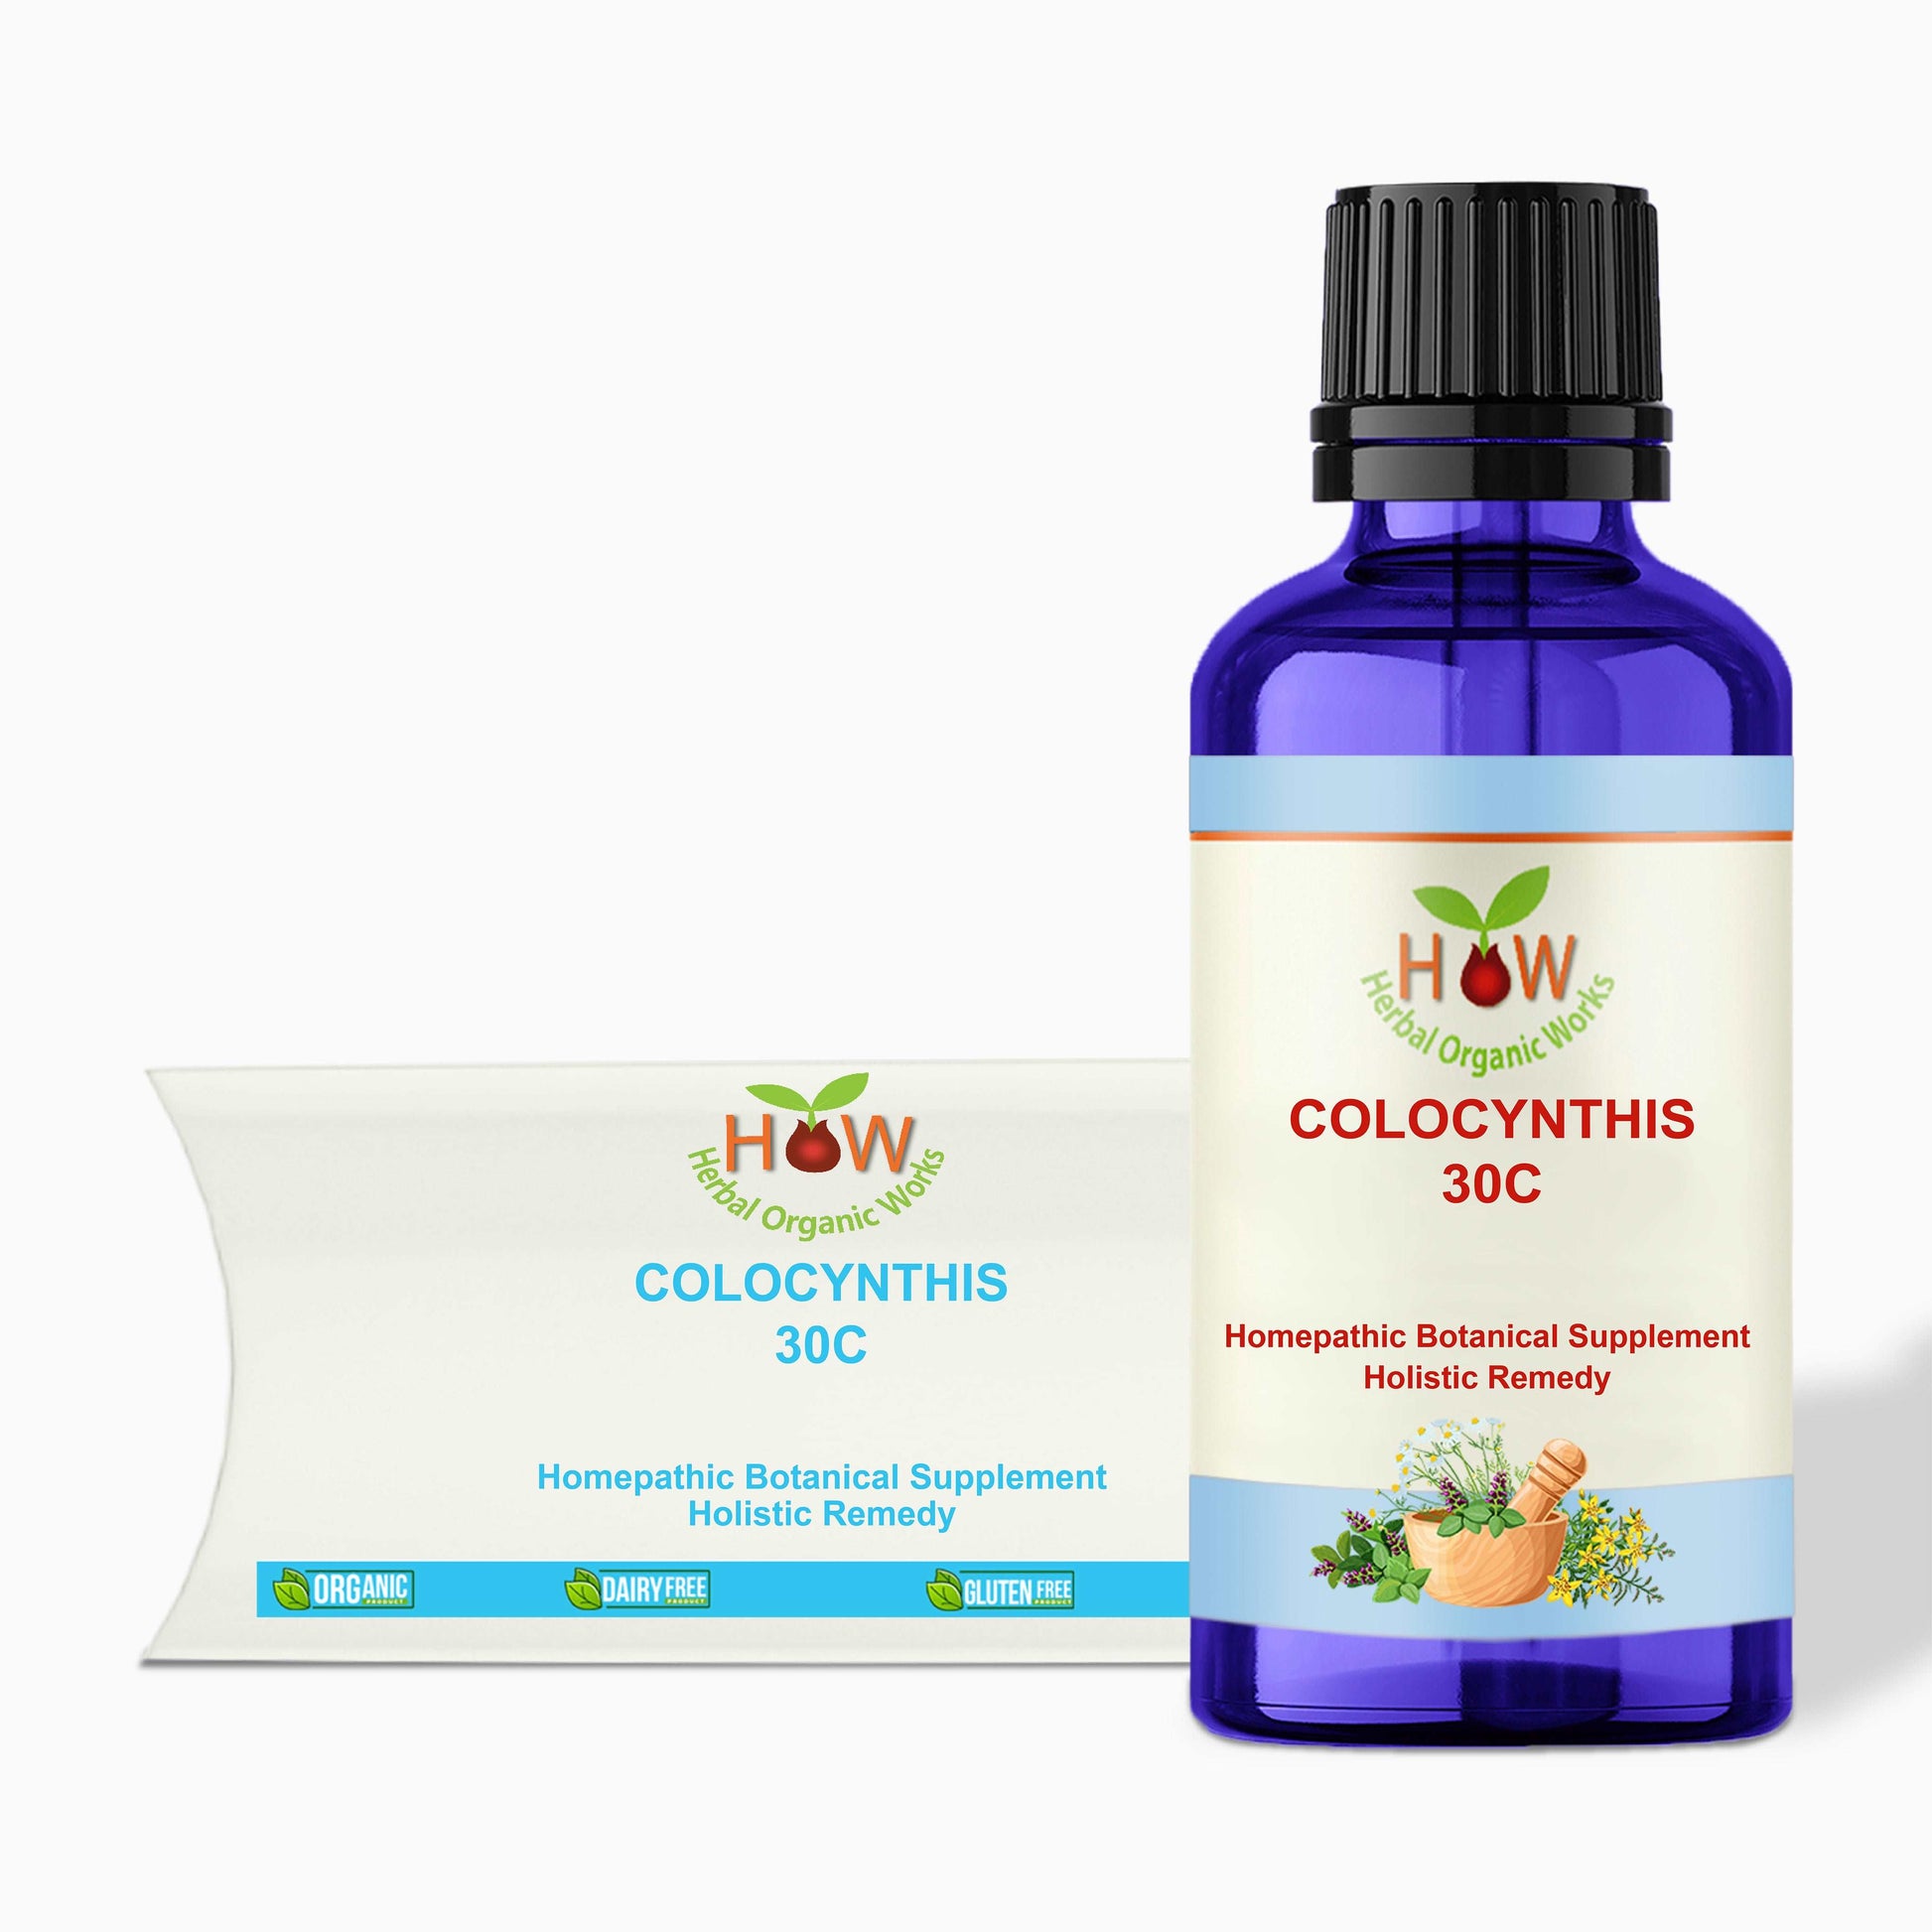 COLOCYNTHIS 30C | PLLS FOR SUPPORT FROM ABDOMINAL PAIN